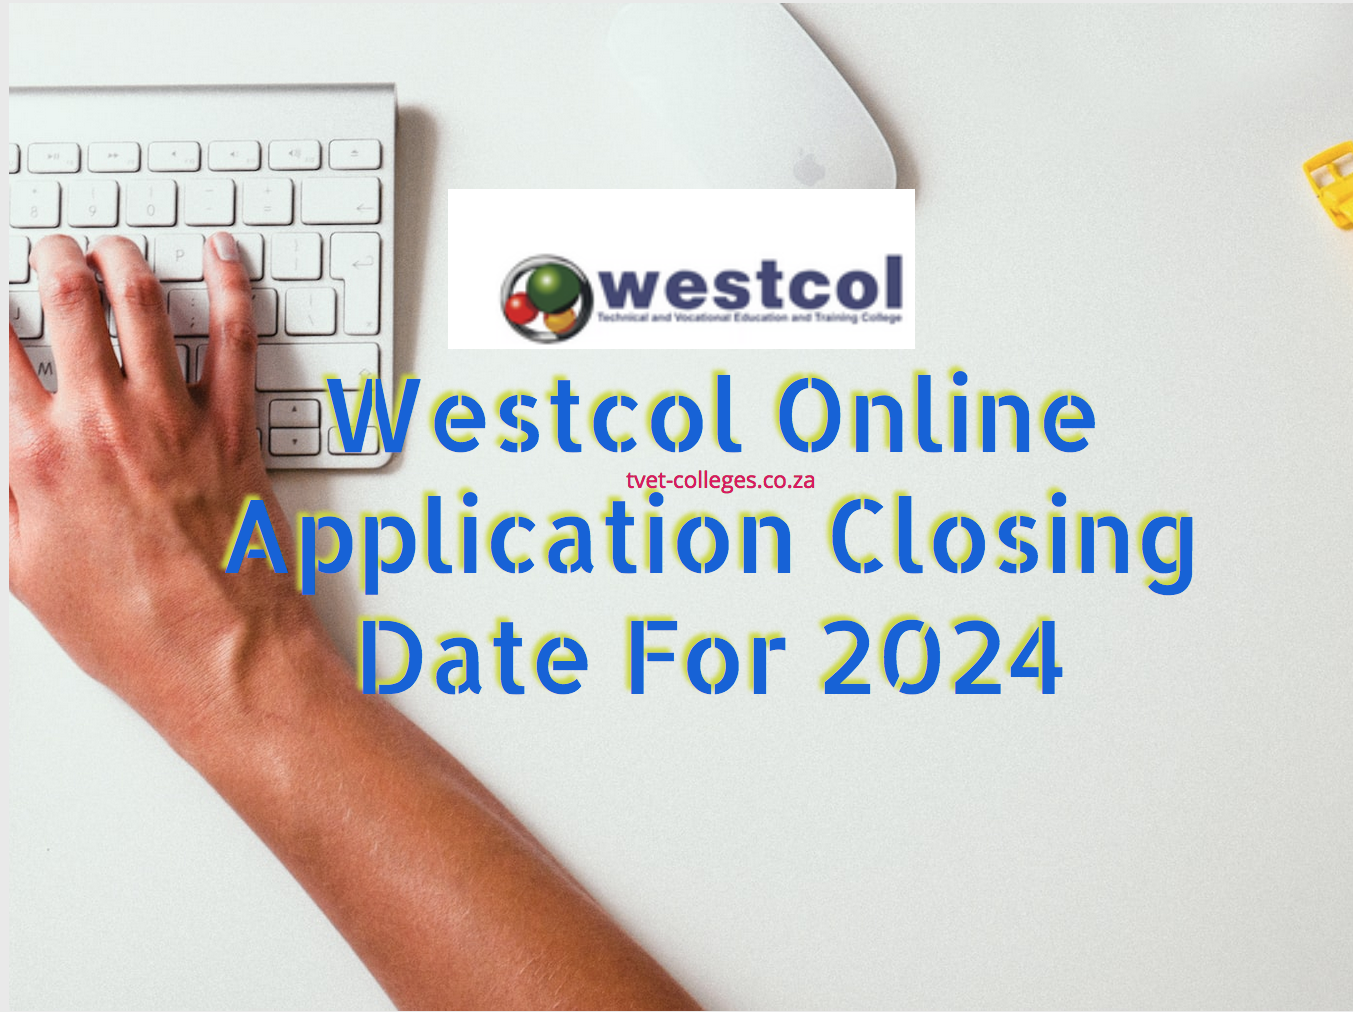 Westcol Online Application Closing Date For 2024 TVET Colleges